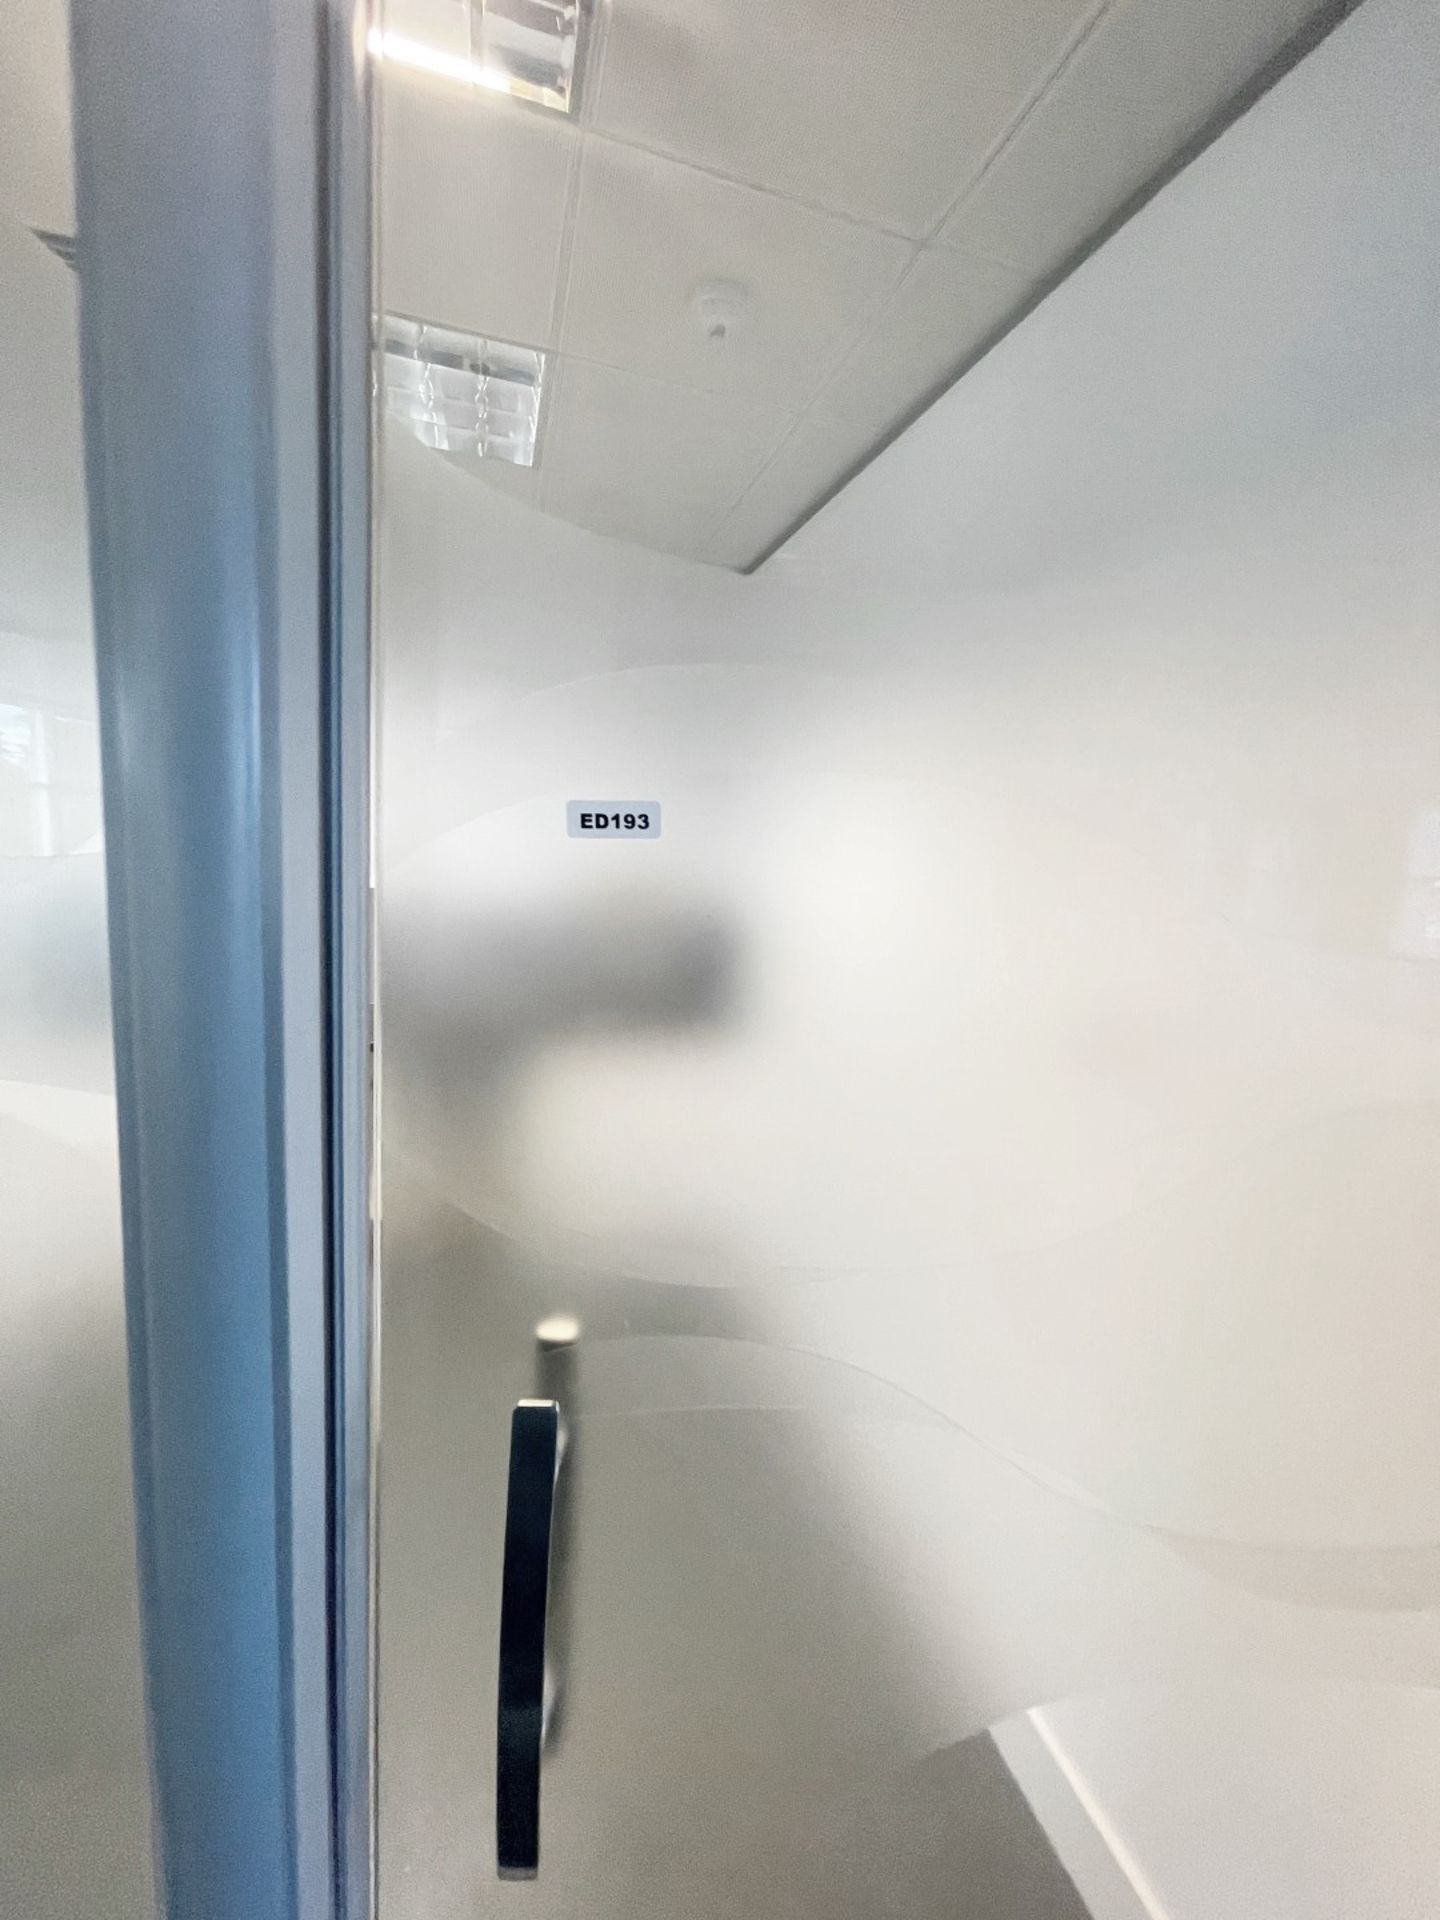 4 x Glass Office Cube Divider Panels - Inc. 2 x Glass Panels and Door - Currently Covering 237cm - Image 4 of 4